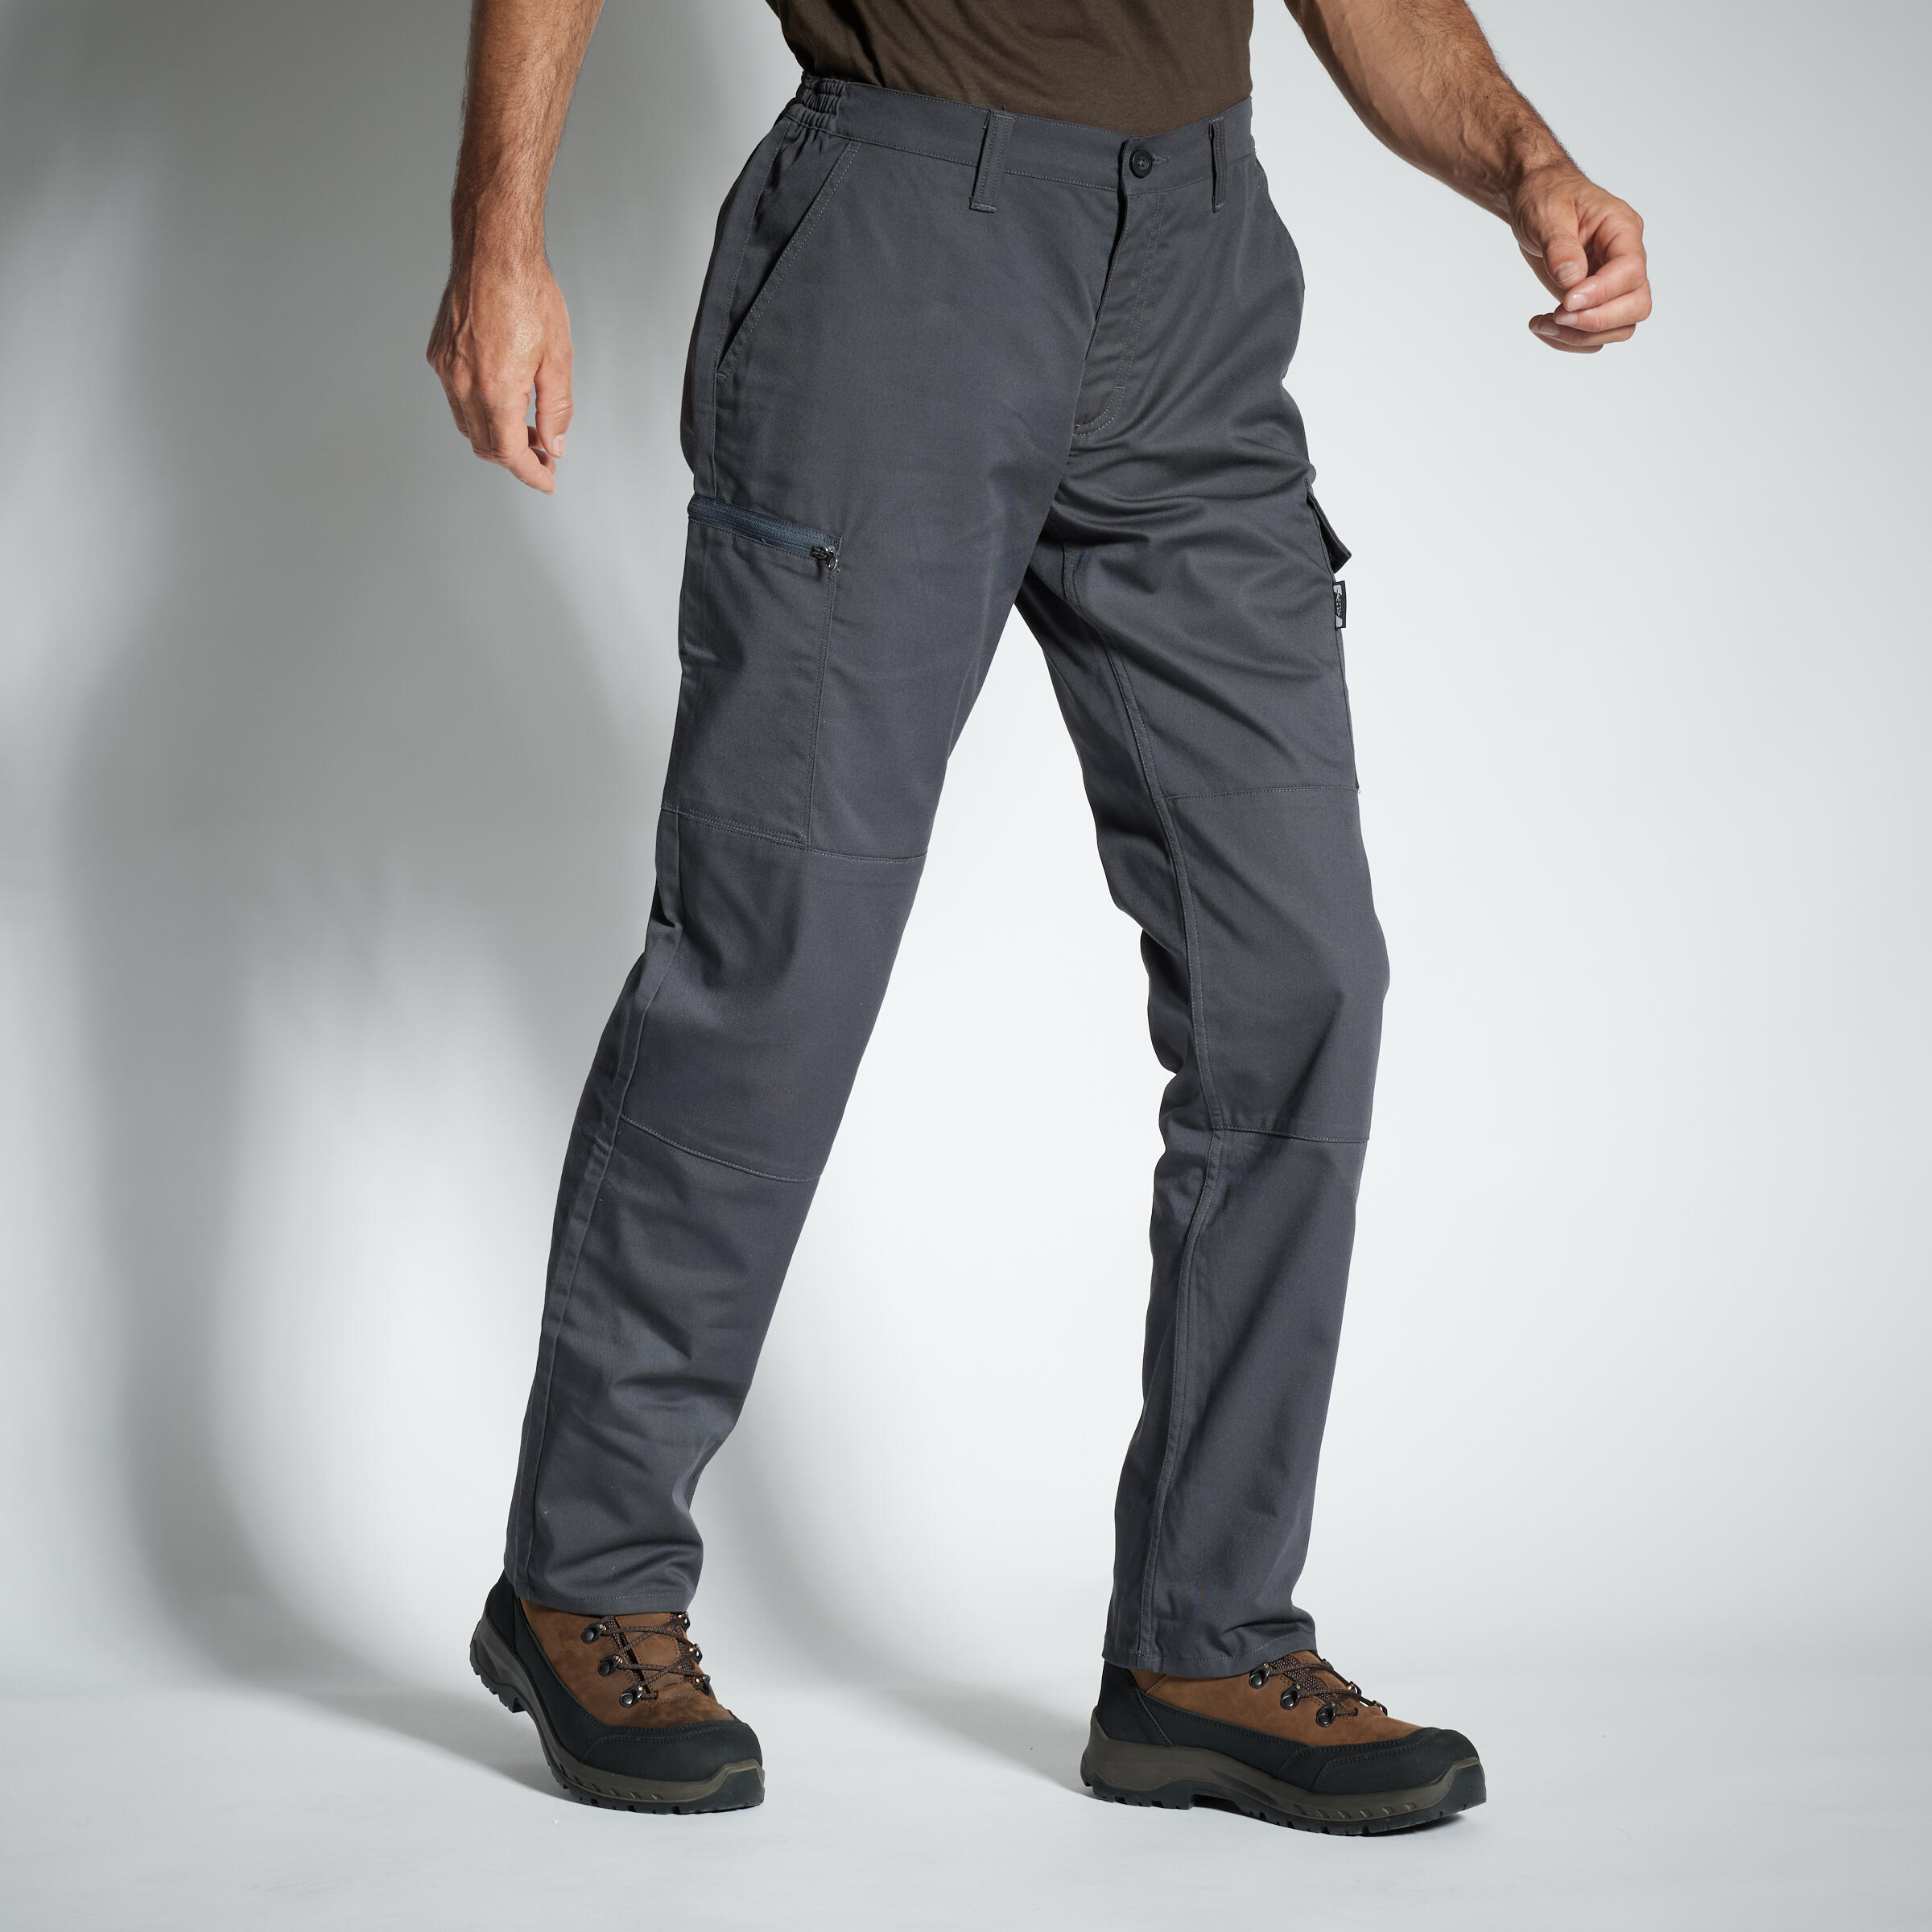 High quality tactical style men's pants - FreeSoldier